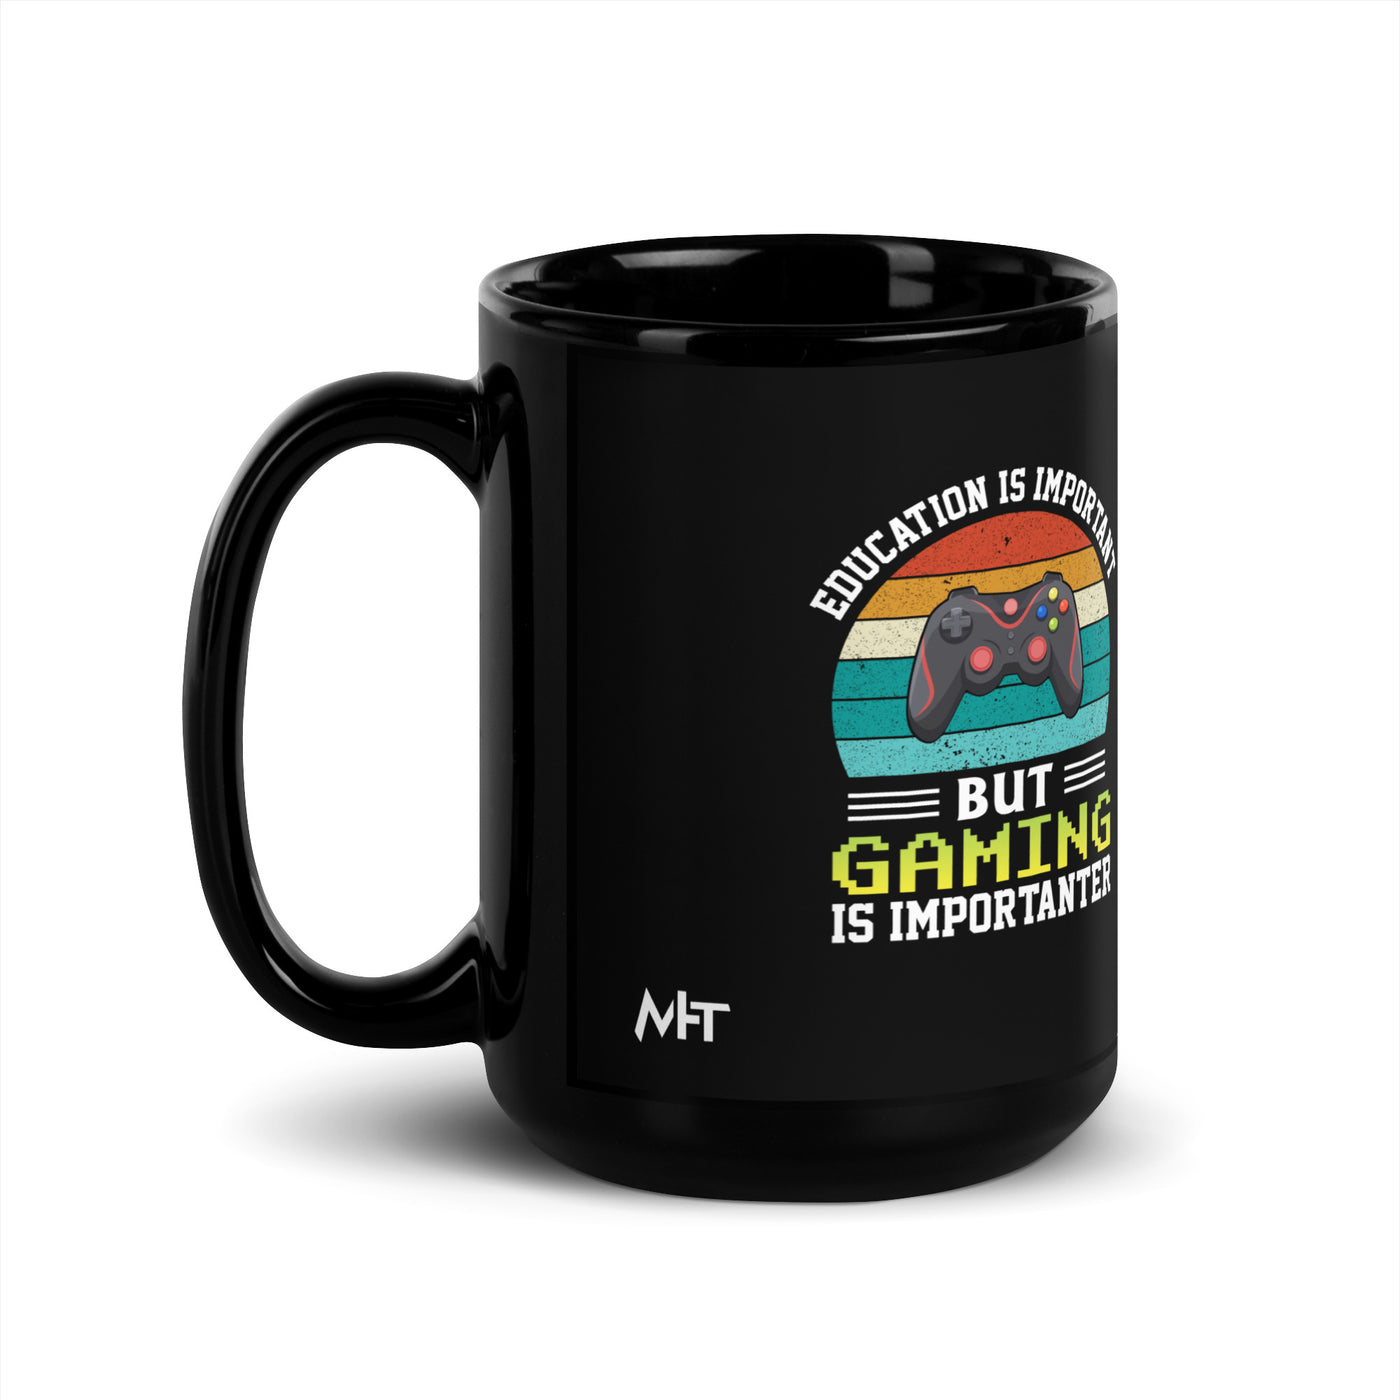 Education is Important, but Gaming is importanter - Black Glossy Mug